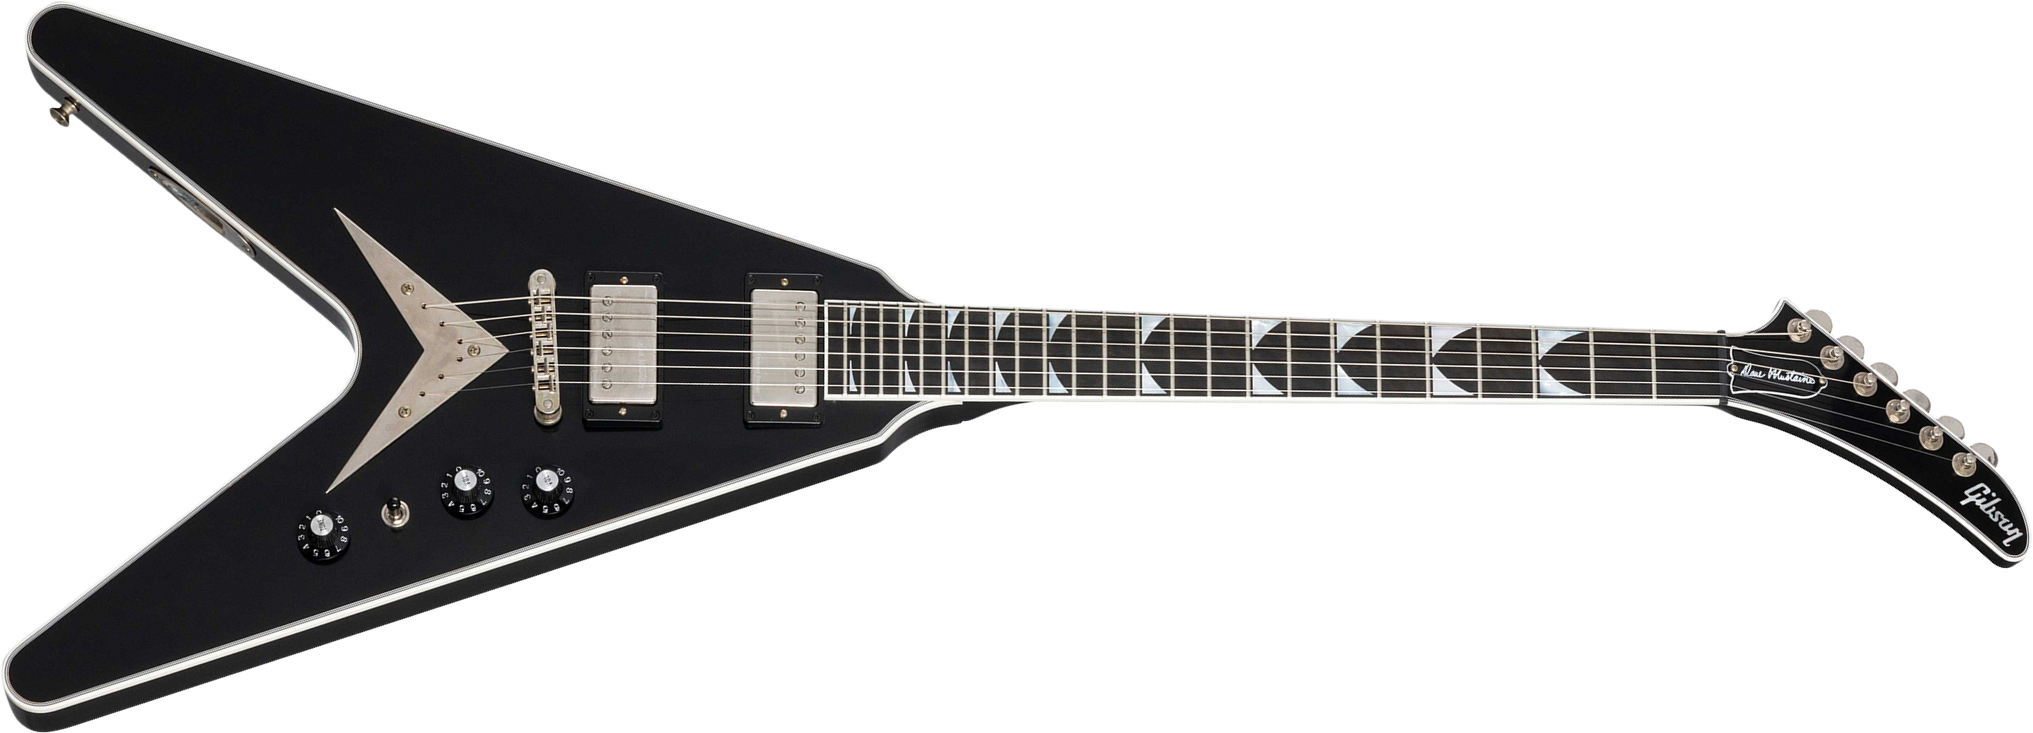 Gibson Custom Shop Dave Mustaine Flying V Exp Ltd Signature 2h Ht Eb - Vos Ebony - E-Gitarre aus Metall - Main picture